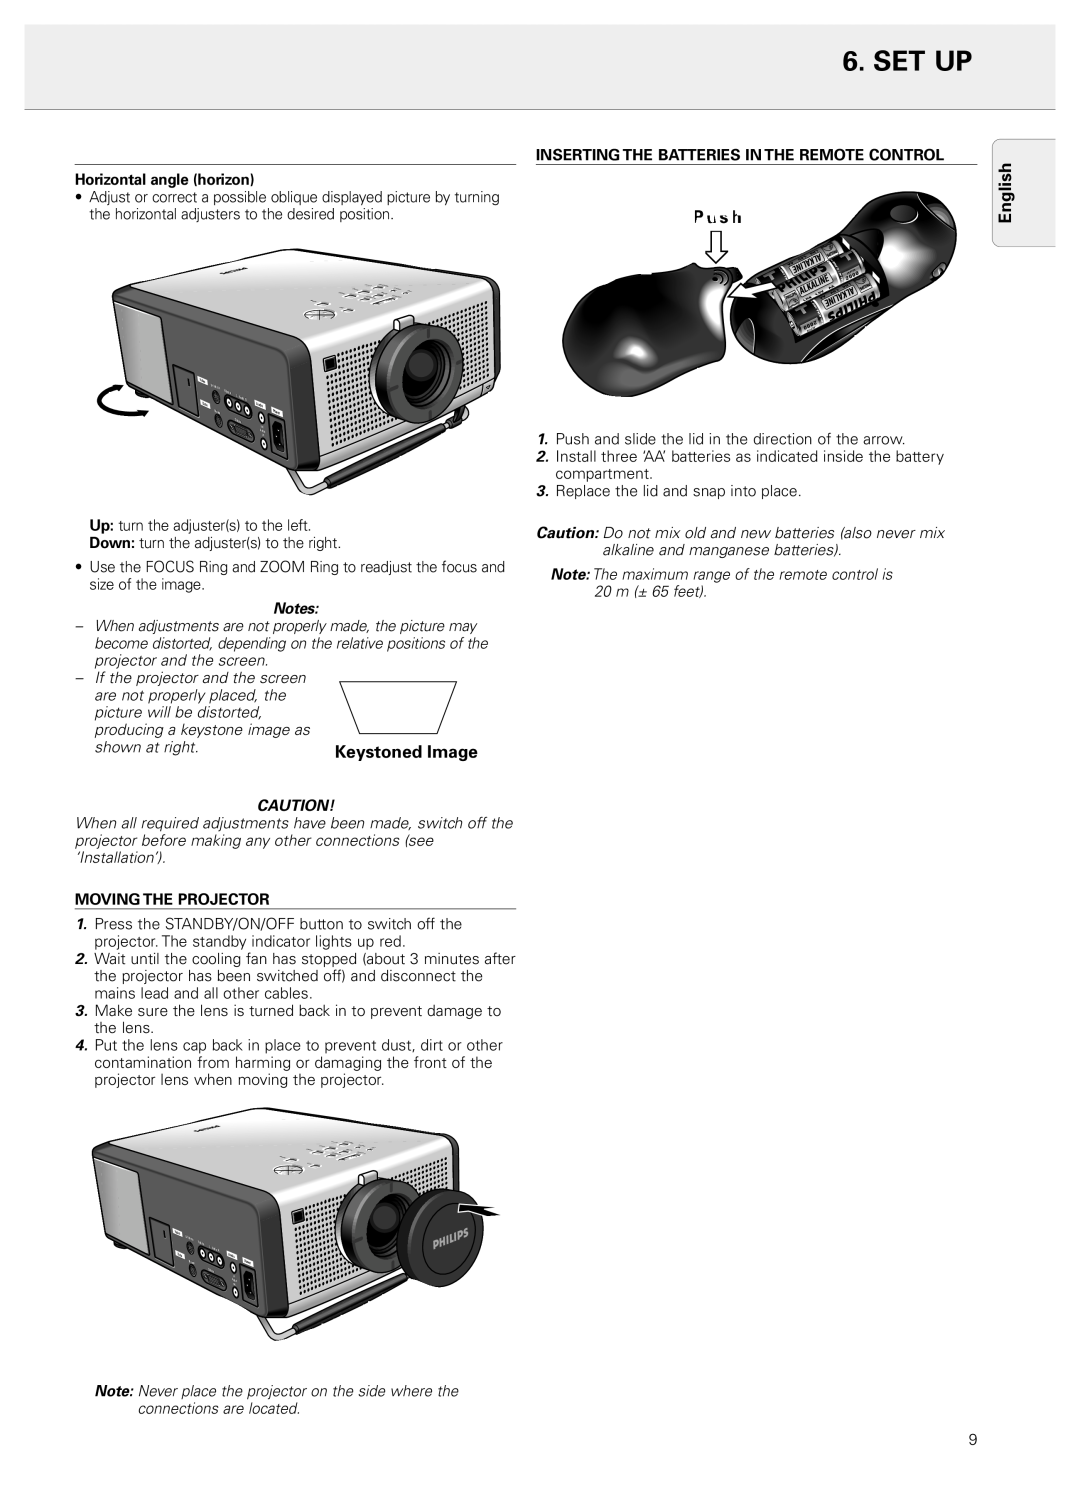 Philips 20 series manual Set Up, English, Inserting The Batteries In The Remote Control, Horizontal angle horizon, P u s h 